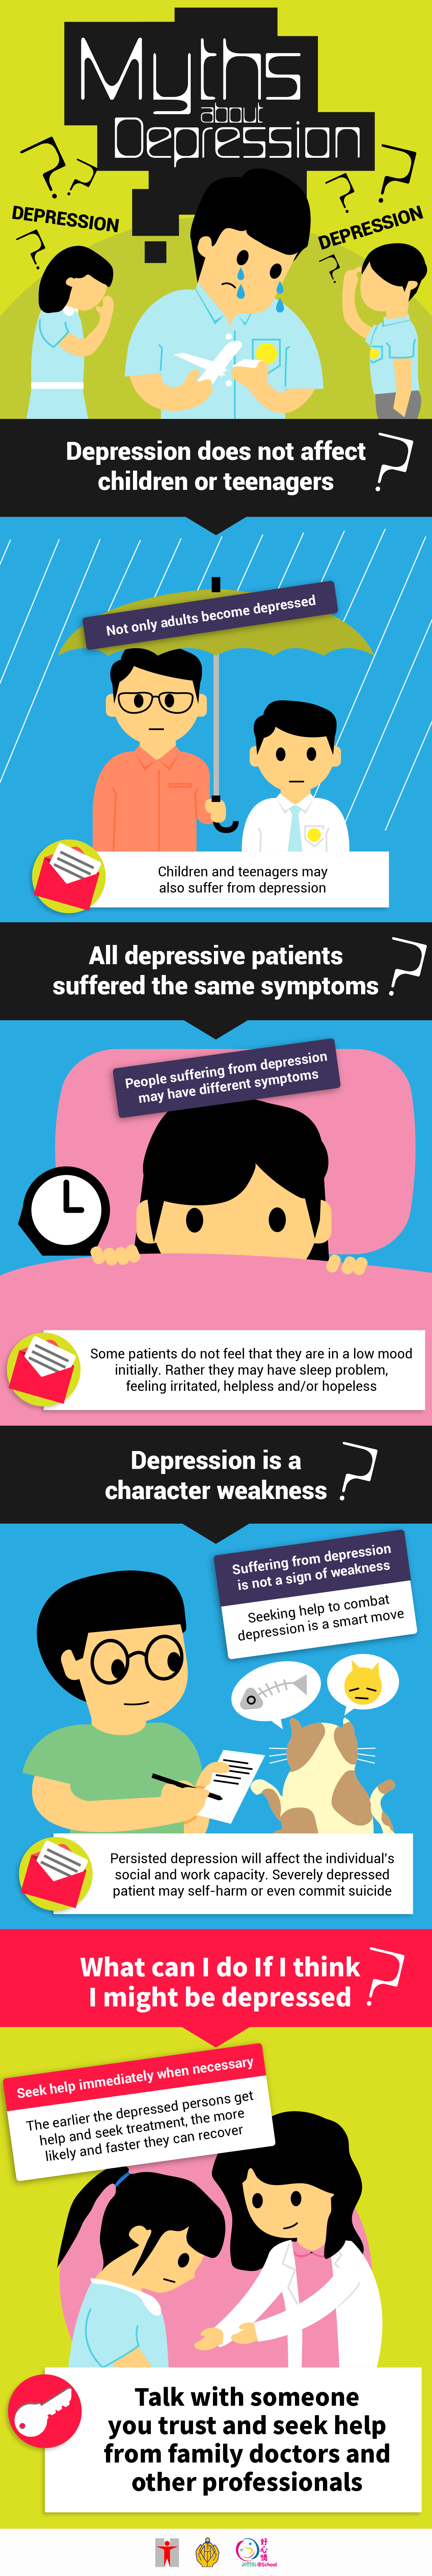 Myths about Depression/Depression does not affect children or teenagers?Not only adults become depressed/Children and teenagers may also suffer from depression/All depressive patients suffered the same symptoms?People suffering from depression may have different symptoms/Some patients do not feel that they are in a low mood initially. Rather they may have sleep problem, feeling irritated, helpless and/or hopeless/Depression is a character weakness?Suffering from depression is not a sign of weakness/Seeking help to combat depression is a smart move/Persisted depression will affect the individual’s social and work capacity. Severely depressed patient may self-harm or even commit suicide/What can I do If I think I might be depressed?Seek help immediately when necessary/The earlier the depressed persons get help and seek treatment, the more likely and faster they can recover/Talk with someone you trust and seek help from family doctors and other professionals